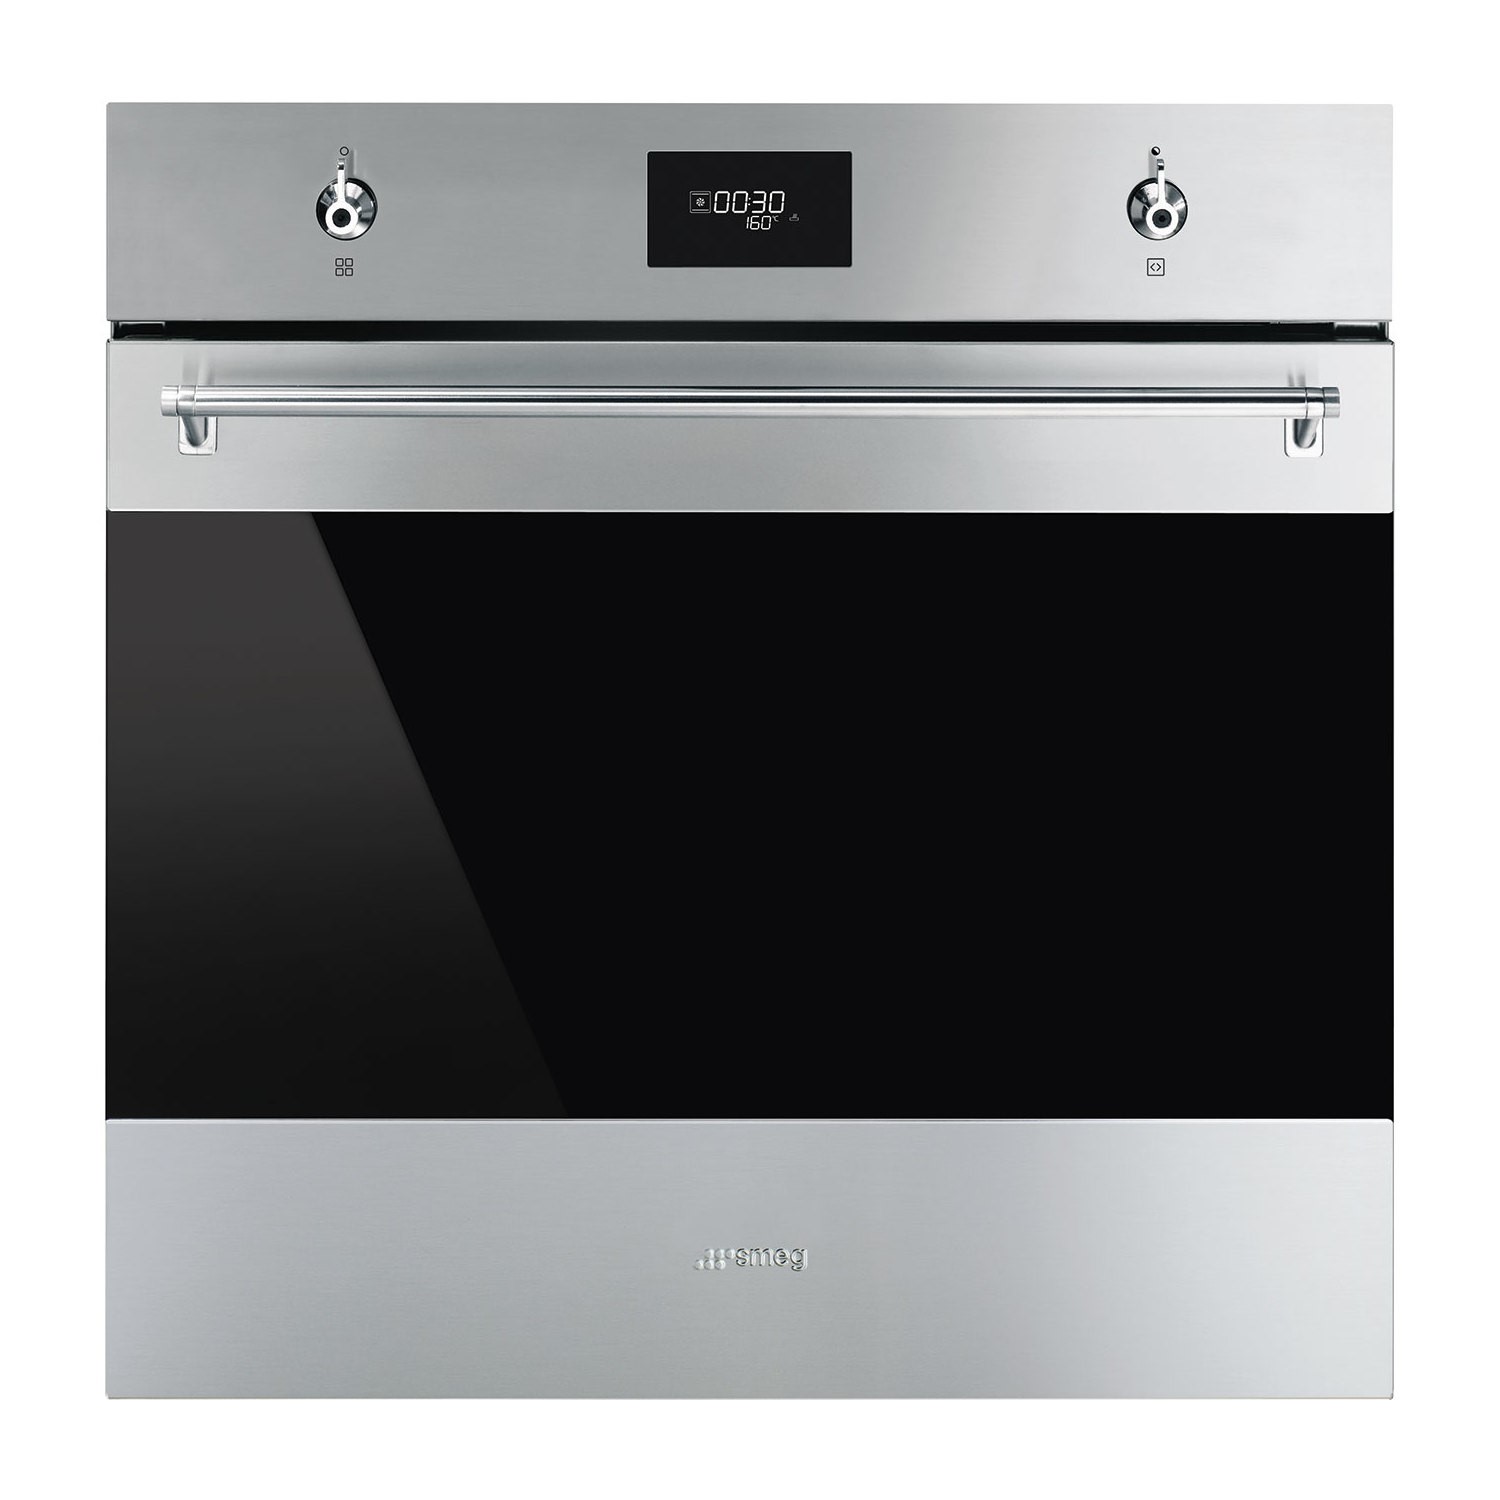 Refurbished Smeg SF6301TVX 60cm Single Built In Electric Oven Stainless Steel